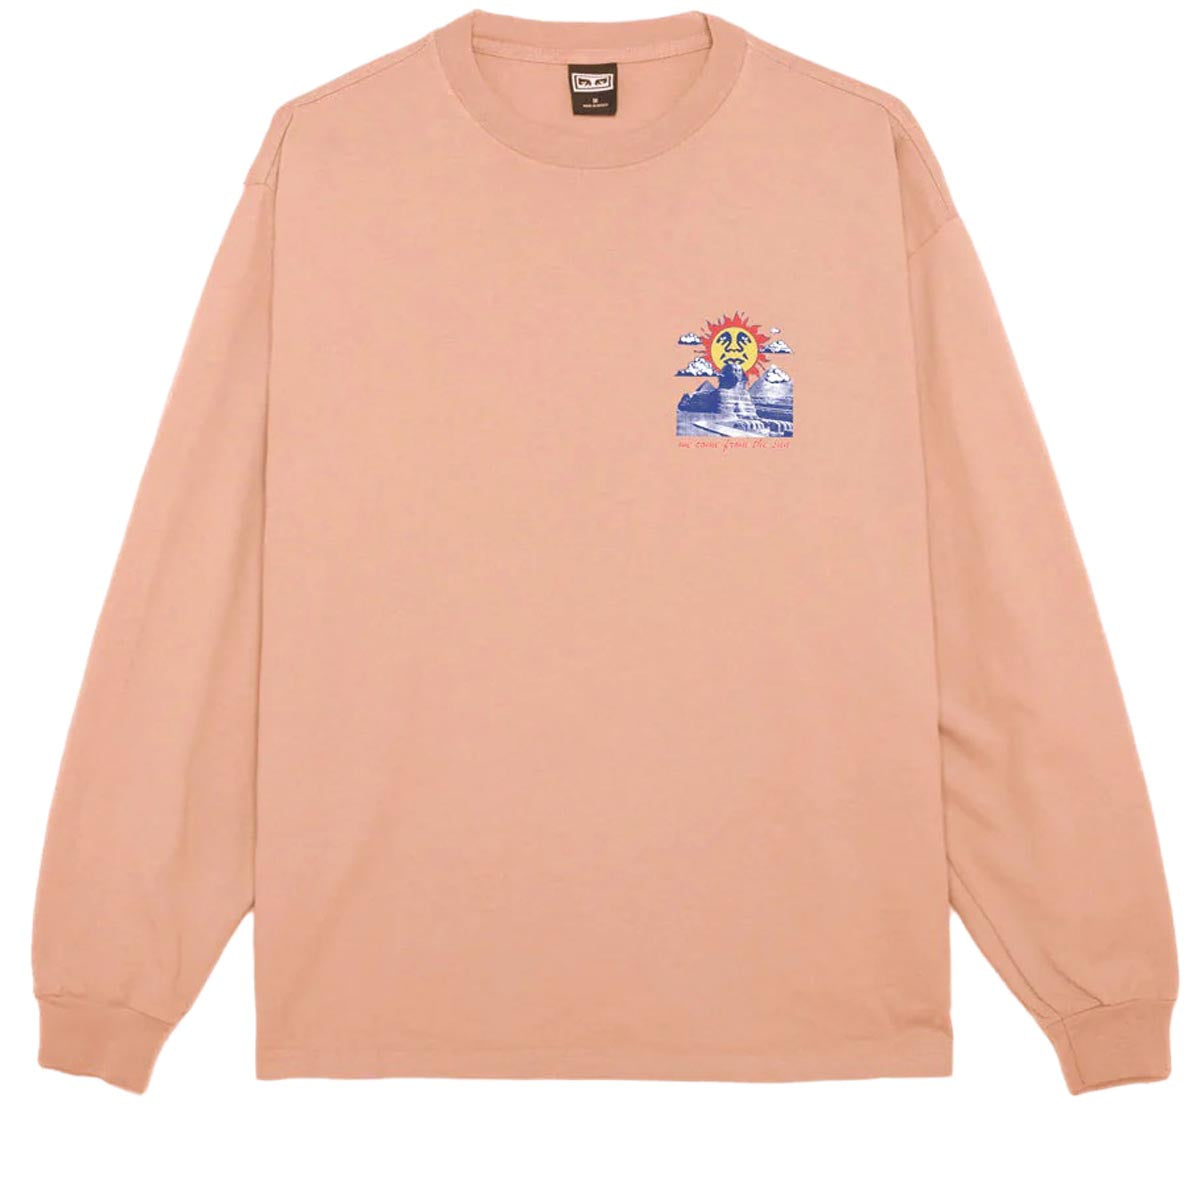 Obey We Come From The Sun Long Sleeve T-Shirt - Peach Parfait image 2